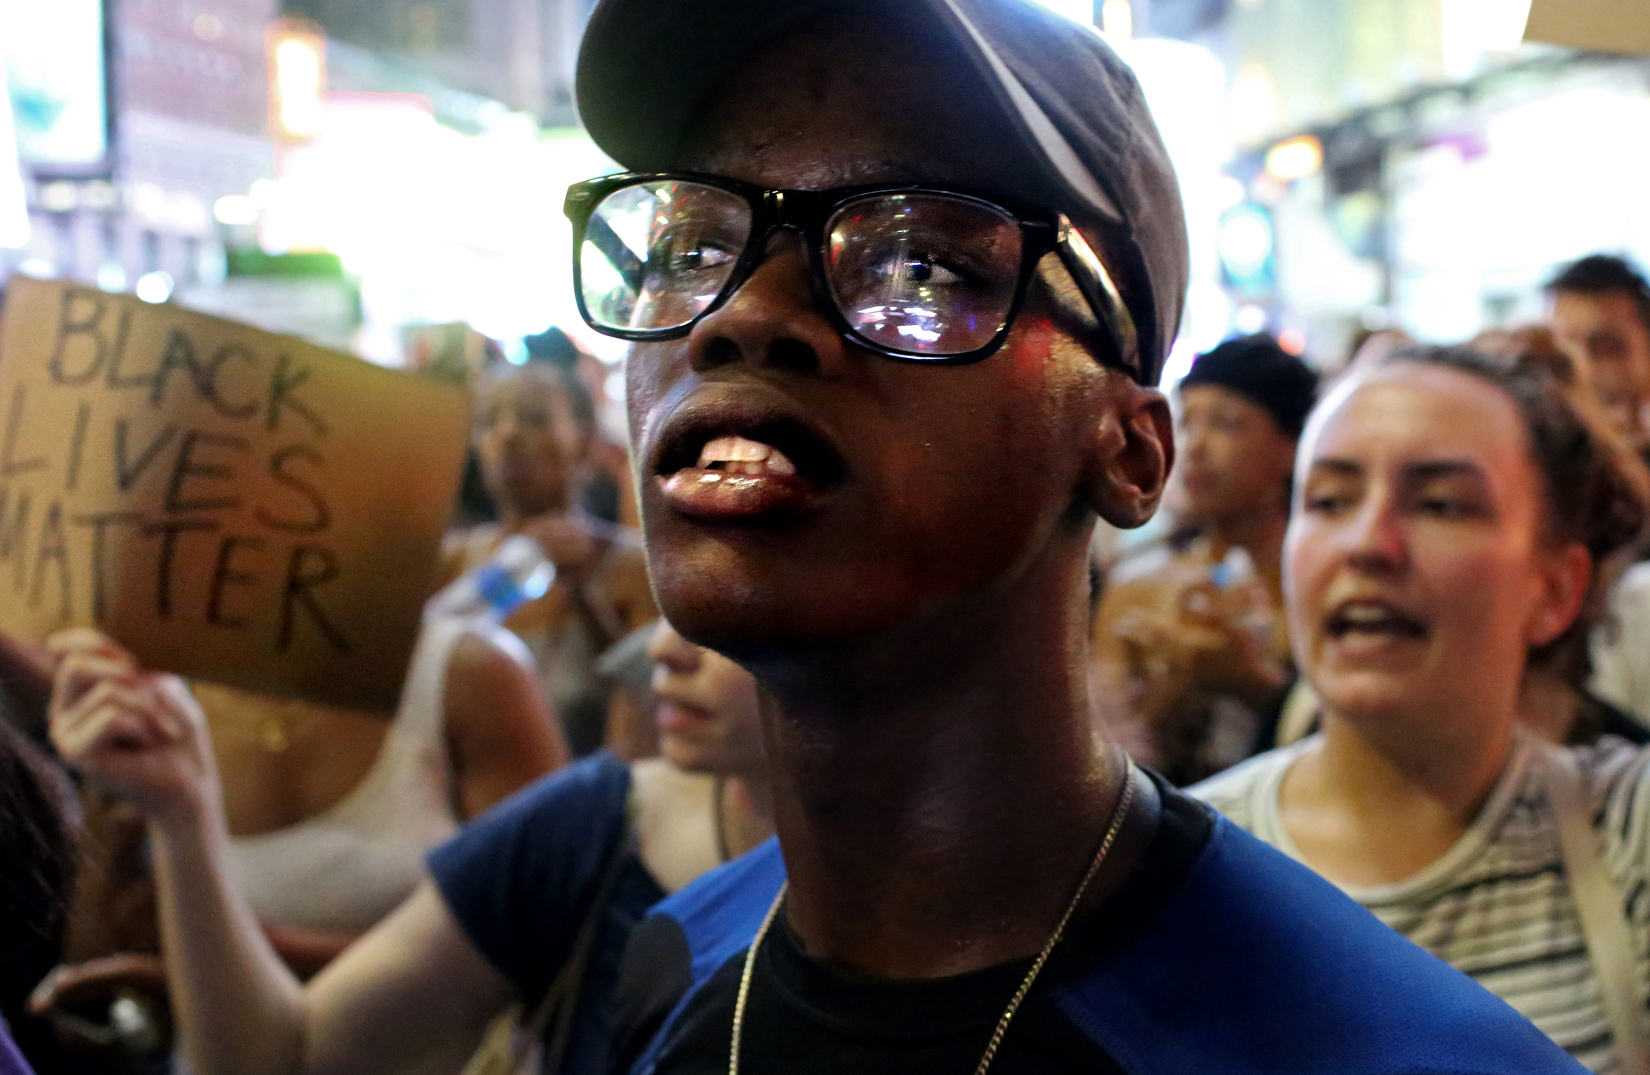 Activists protest in Times Square in response to the recent fatal shootings of two black men by police, July 7, 2016 in New York, NY. Protests and public outcry have grown in the days following the deaths of Alton Sterling on July 5, 2016 in Baton Rouge, Louisiana and Philando Castile on July 6, 2016, in Falcon Heights, Minnesota. (For Getty Images)